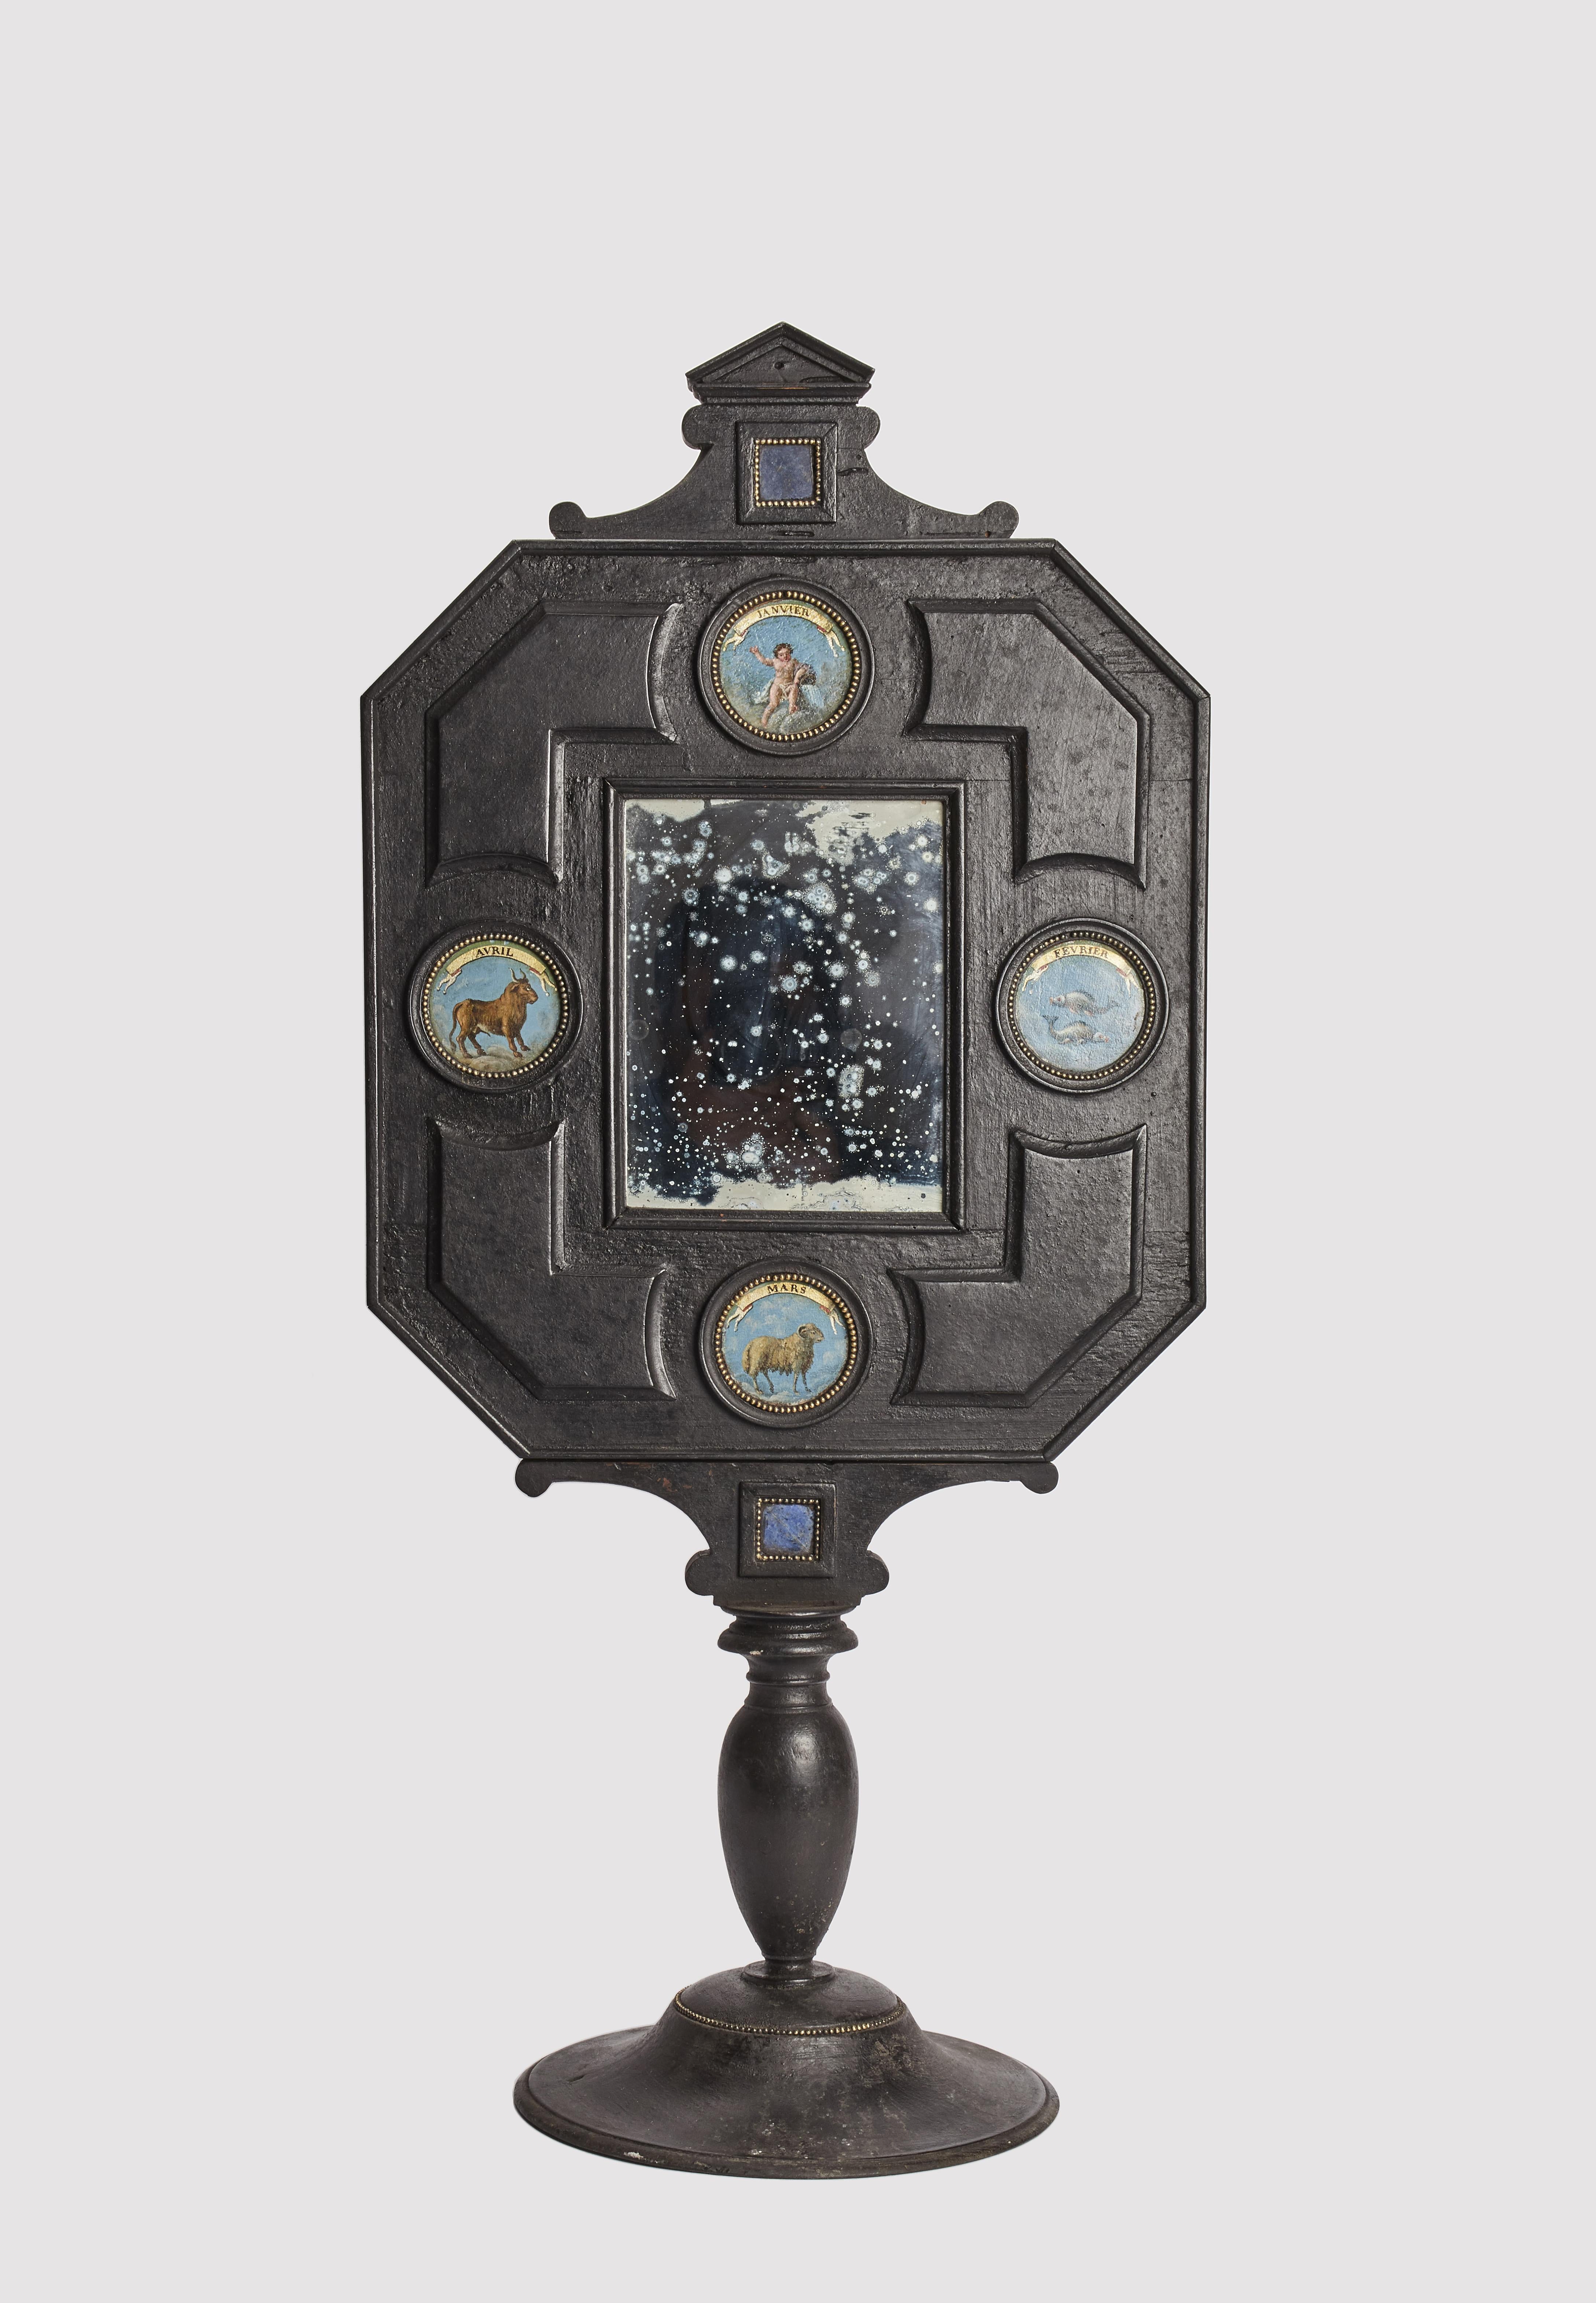 A Wunderkammer three big mirrors with a black octagonal wooden frame, with 2 lapis lazuli embedded in a frame, mounted over a black round wooden base. Each mirror contains 4 round inserts depicting different zodiac signs, painted oil on leather,